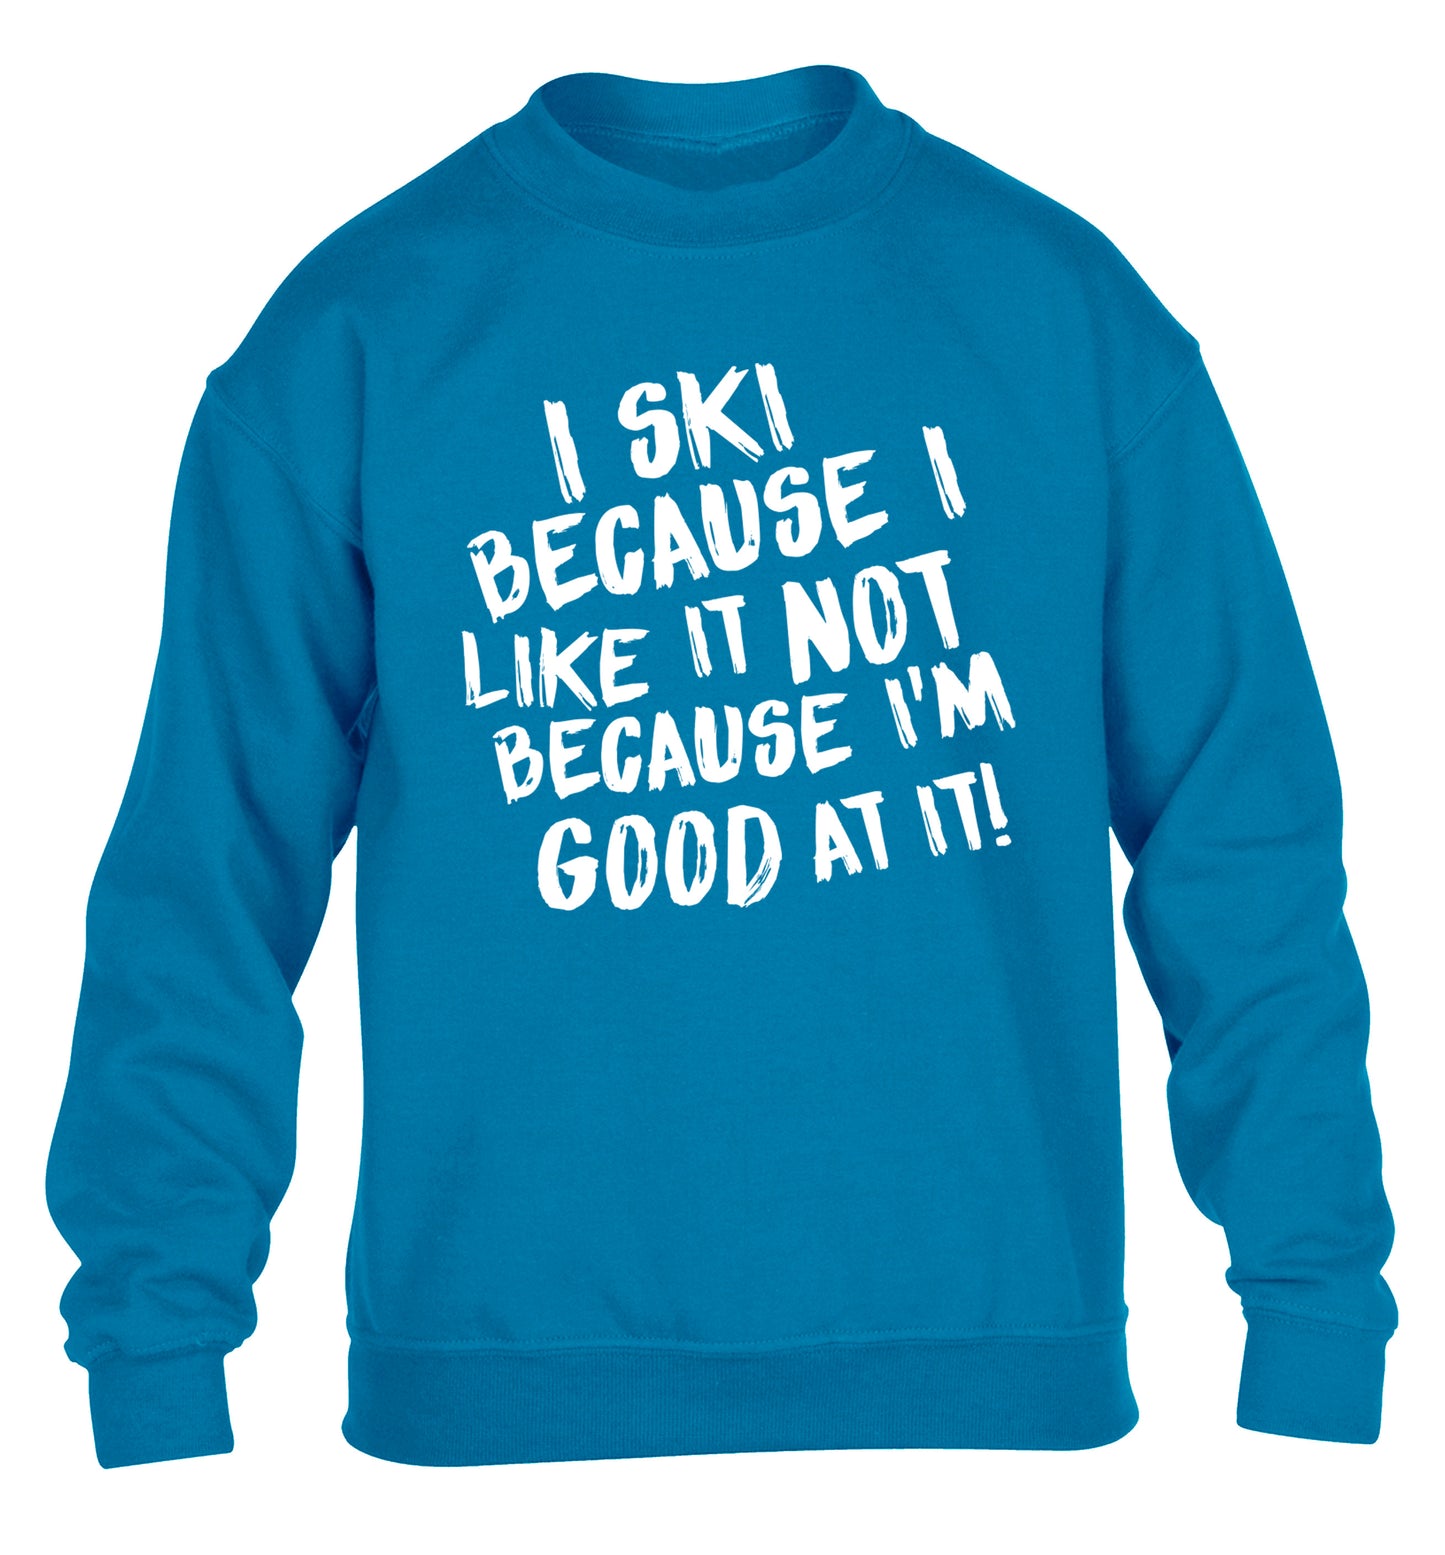 I ski because I like it not because I'm good at it children's blue sweater 12-14 Years